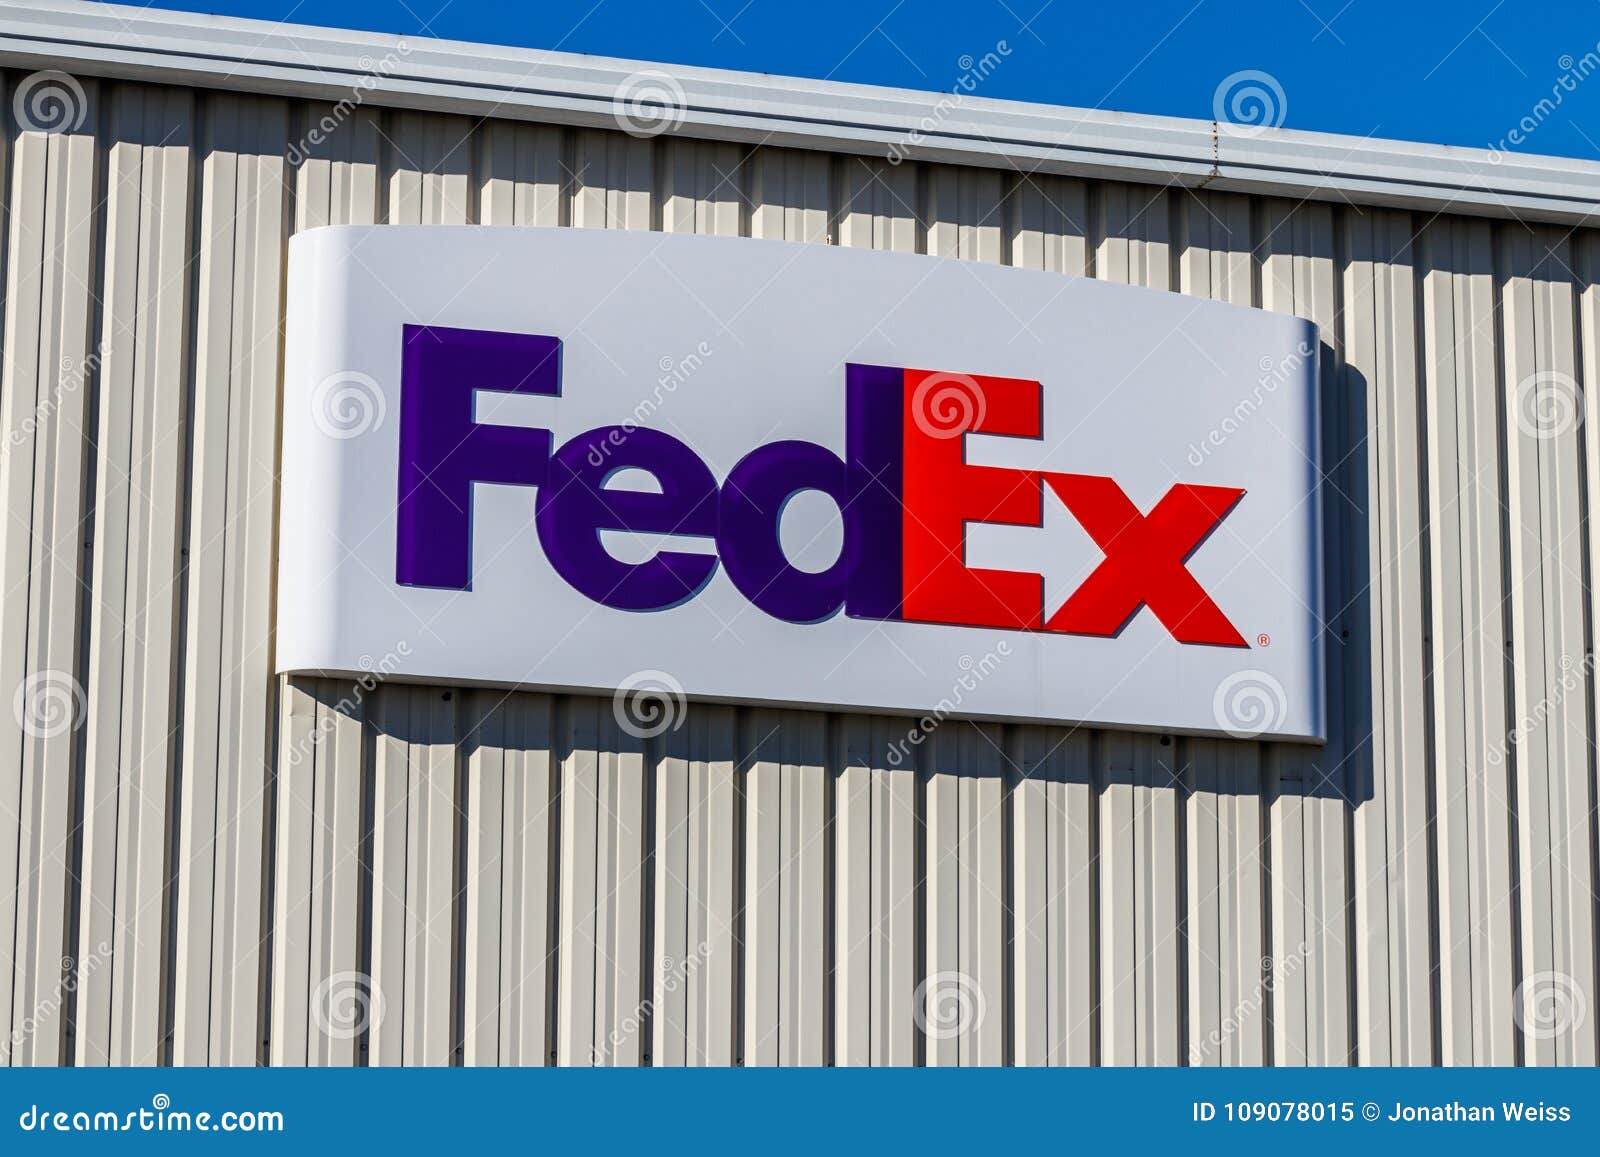 Lafayette - Circa February 2018: Federal Express Signage and Logo at a ...